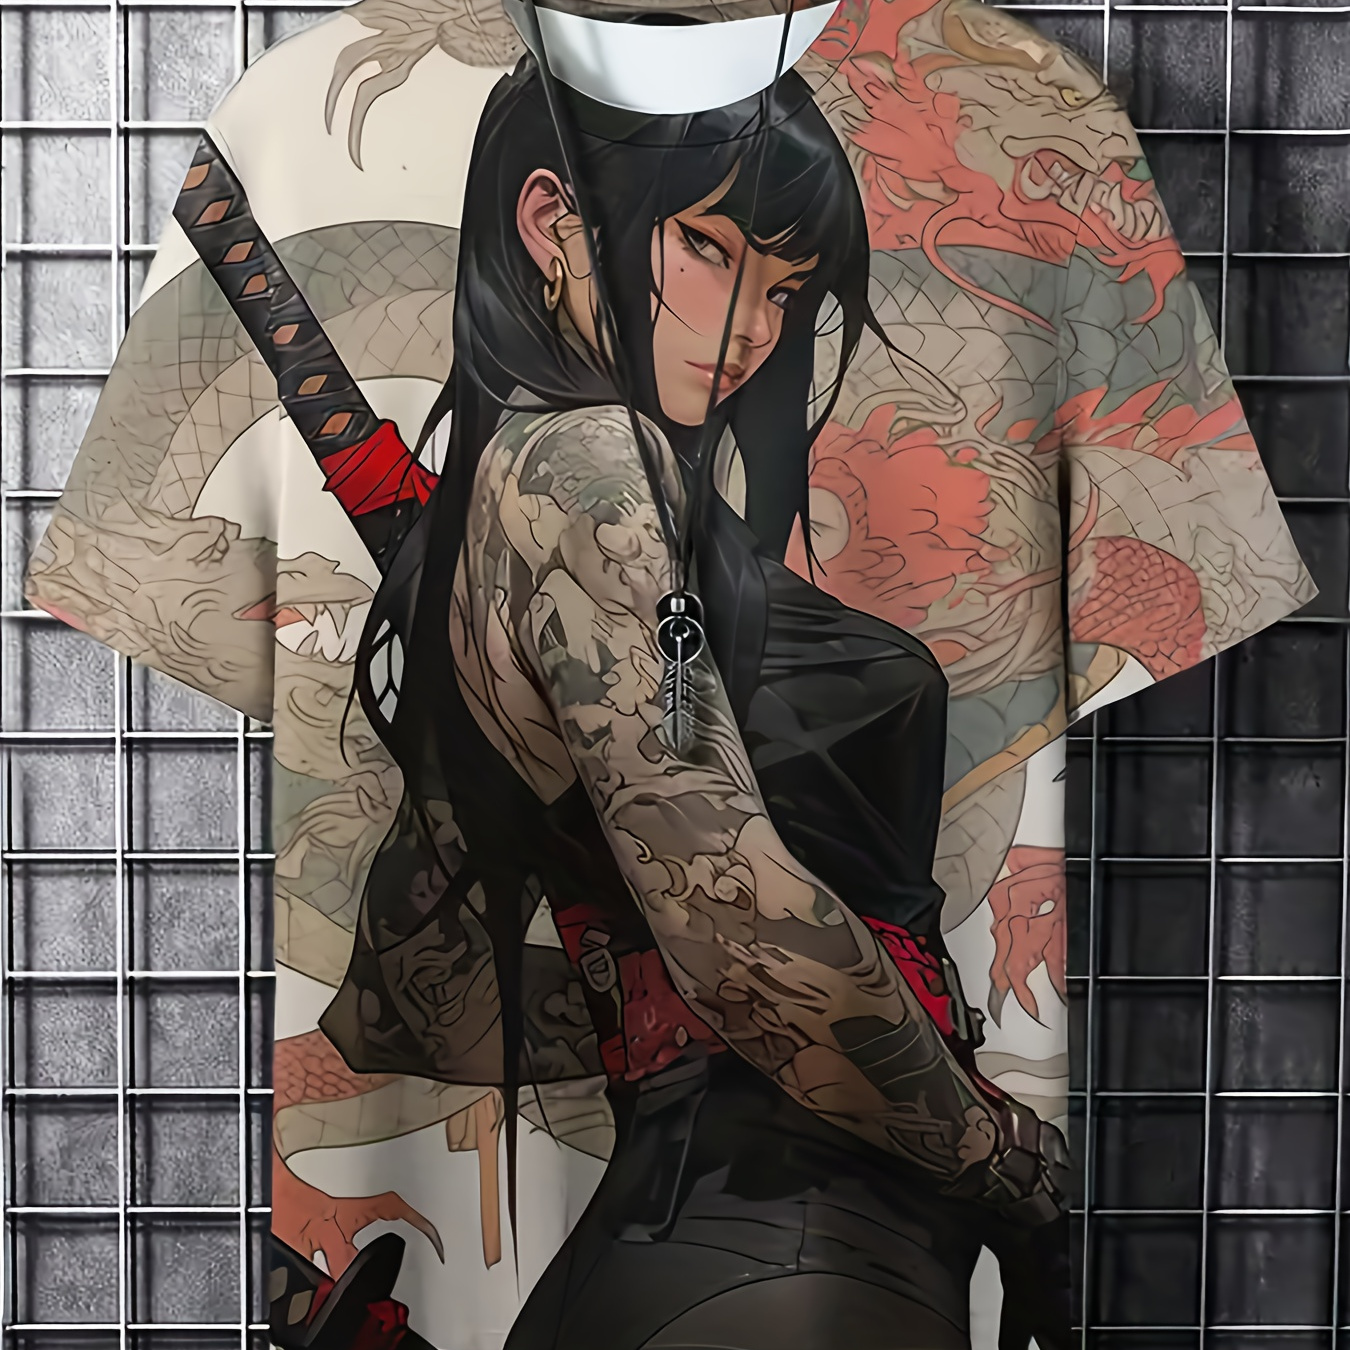 

Cartoon Style Woman Samurai And Dragon Pattern Crew Neck And Short Sleeve T-shirt, Chic And Stylish Tops For Men's Summer Street Leisurewear